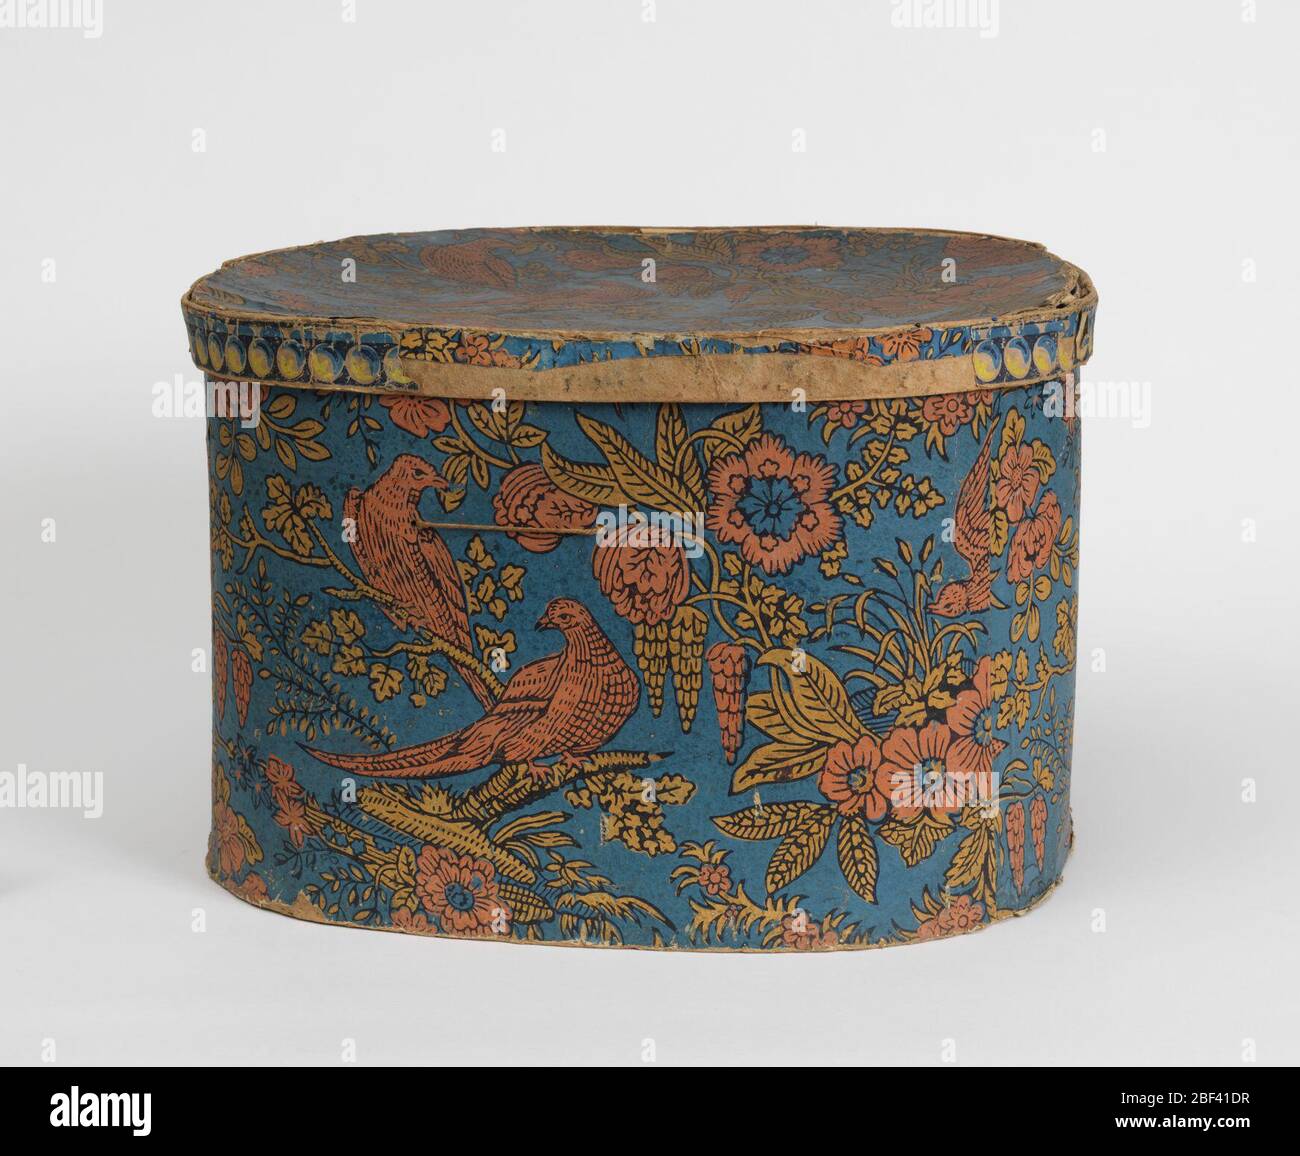 Bandbox. Block print repeat design wallpaper pattern: on blue background, two salmon-colored birds on yellow limb with leaves, sprays of salmon and yellow flowers and leaves, salmon-colored bird in flight. Over-all diagonal movement of pattern. Stock Photo